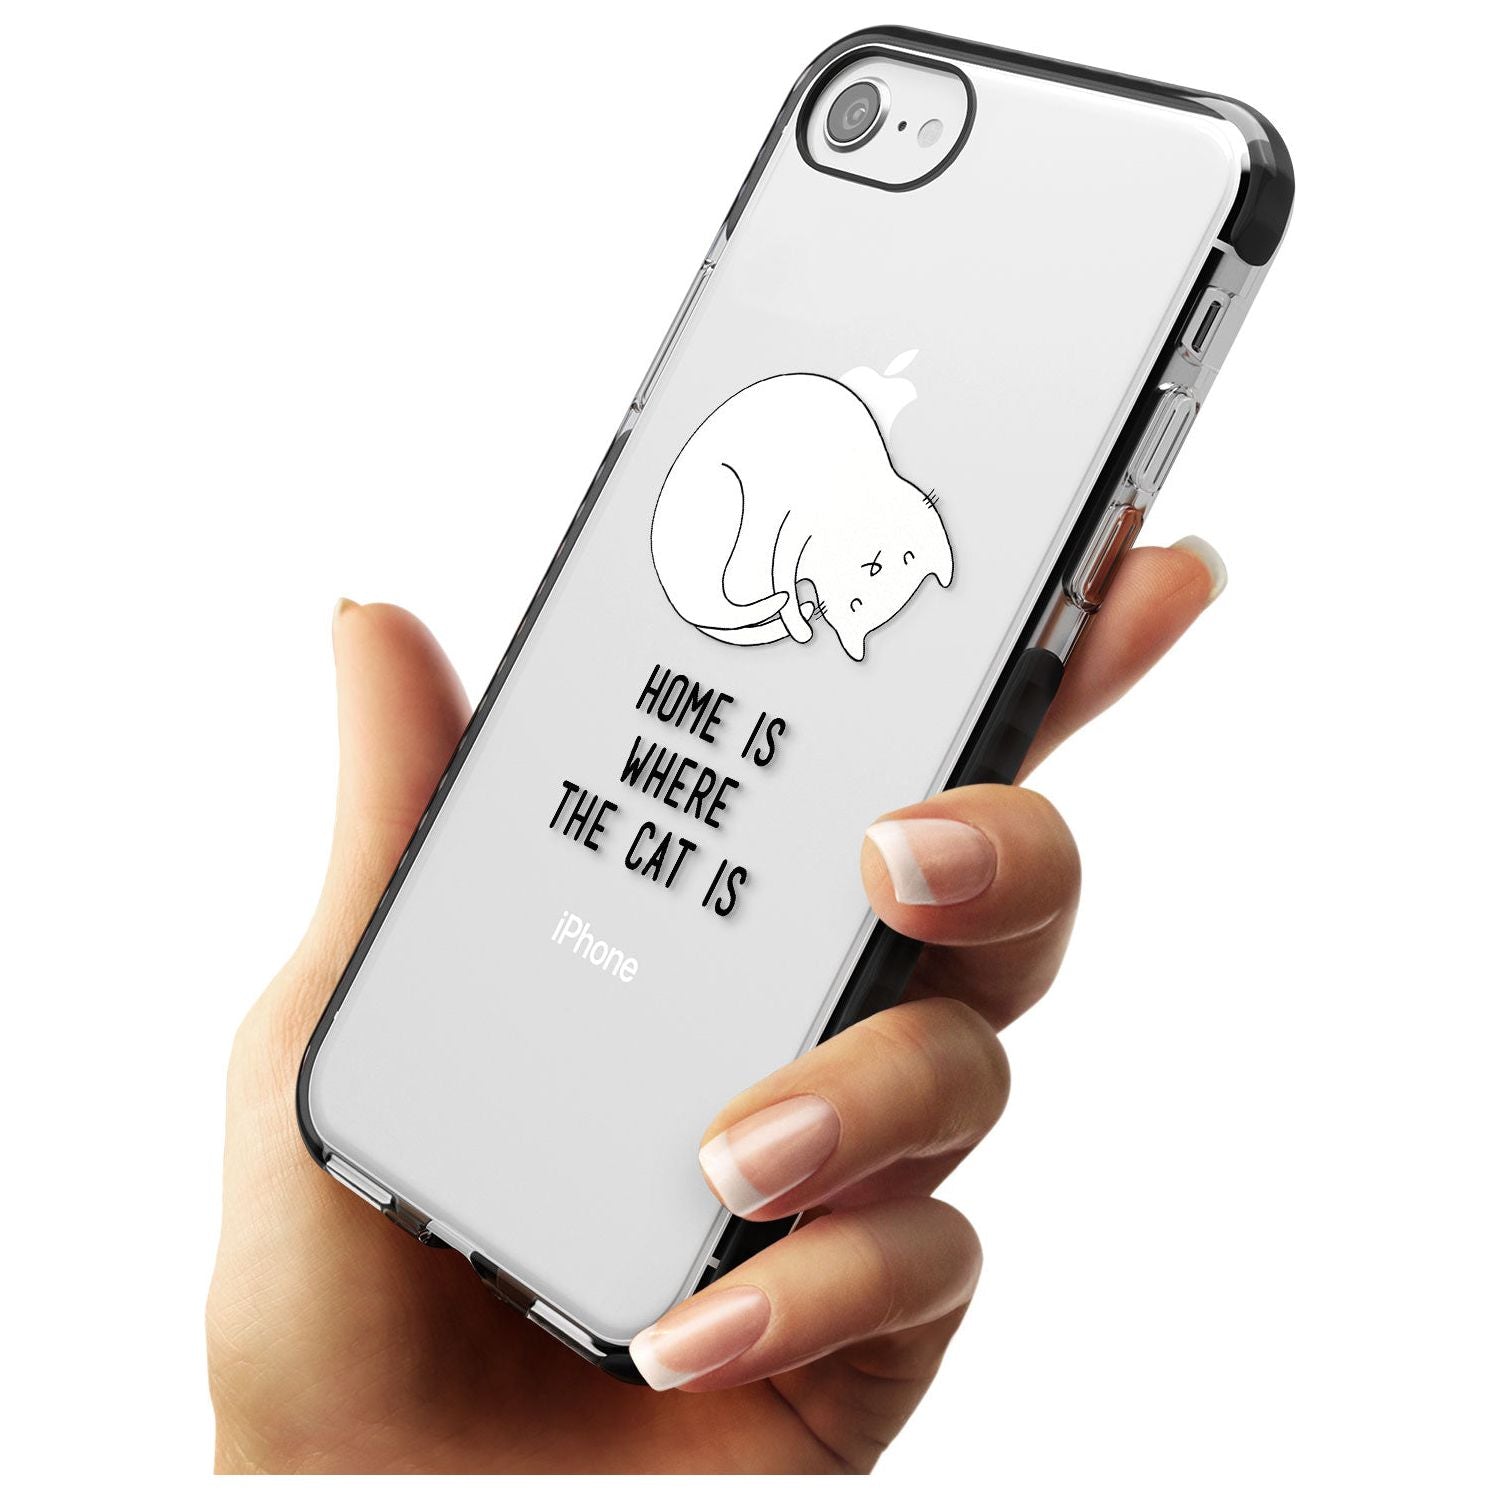 Home Is Where the Cat is Pink Fade Impact Phone Case for iPhone SE 8 7 Plus